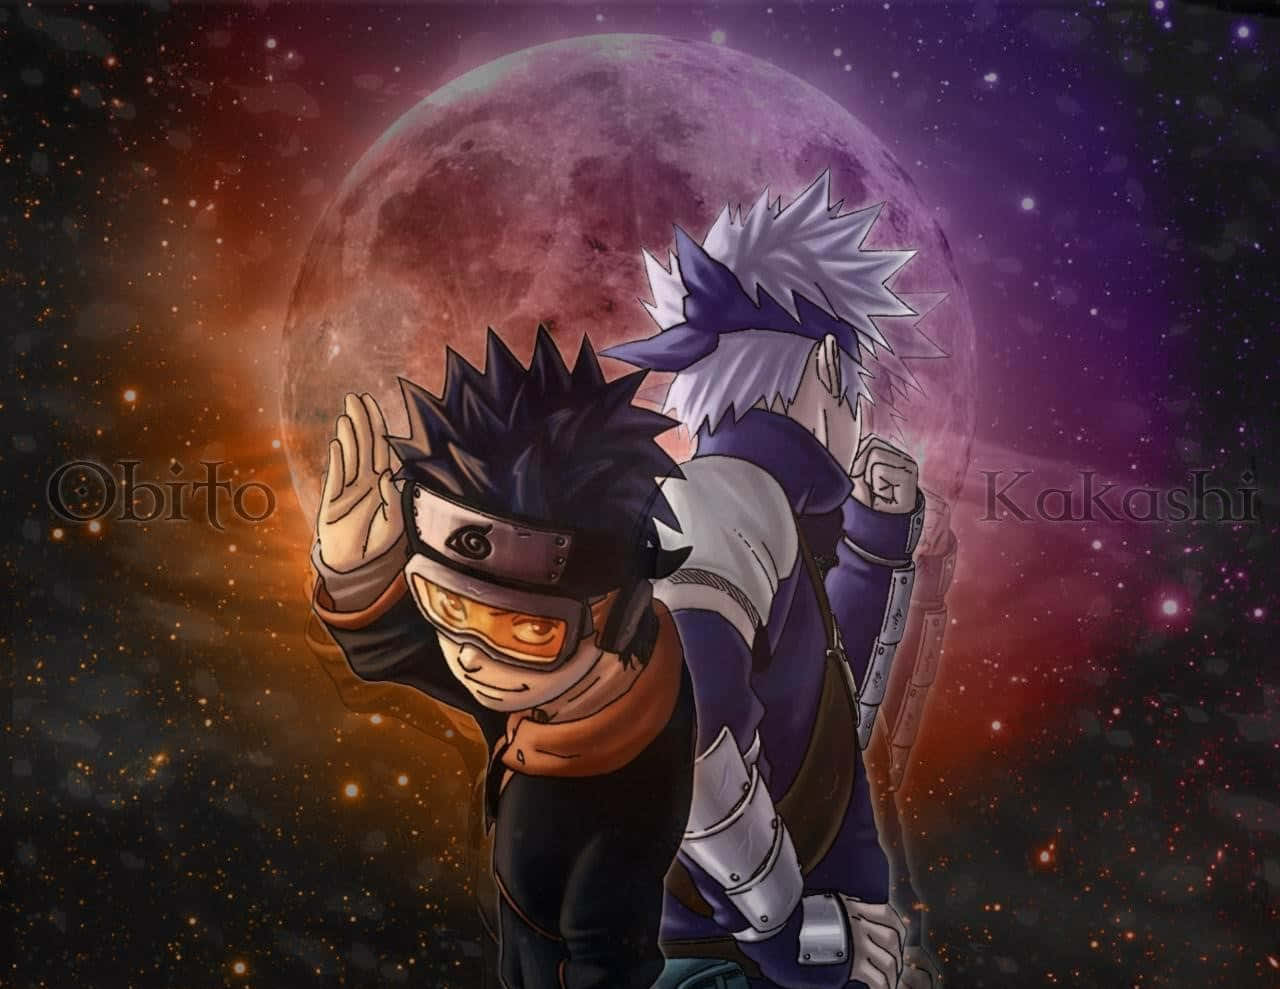 Download Obito And Kakashi iPhone Wallpaper | Wallpapers.com